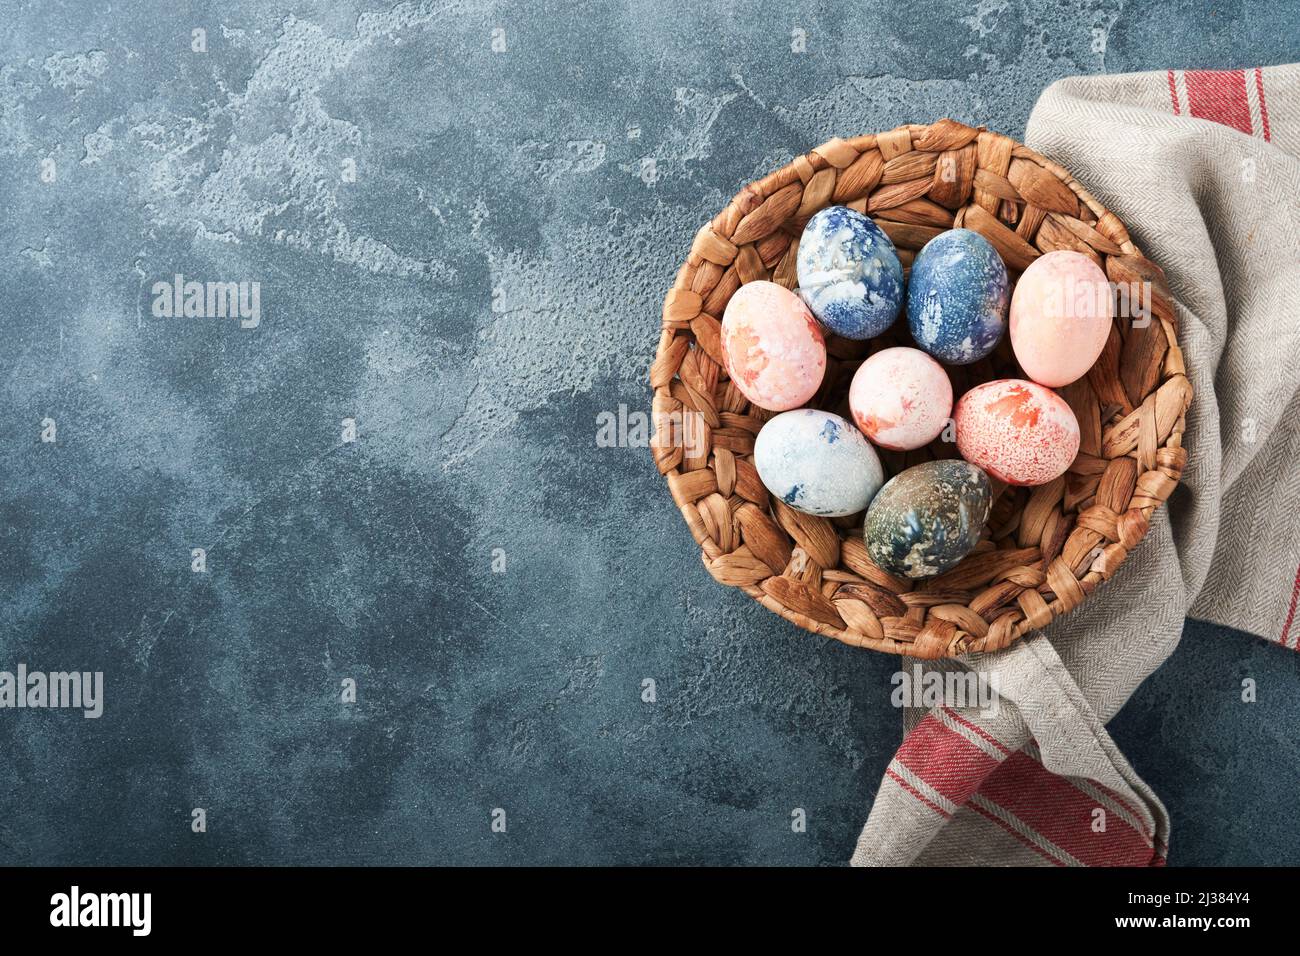 Easter eggs. Dyed Easter eggs with marble stone effect ref and blue color in rustic style on dark stone background. Easter background. Top view. Stock Photo